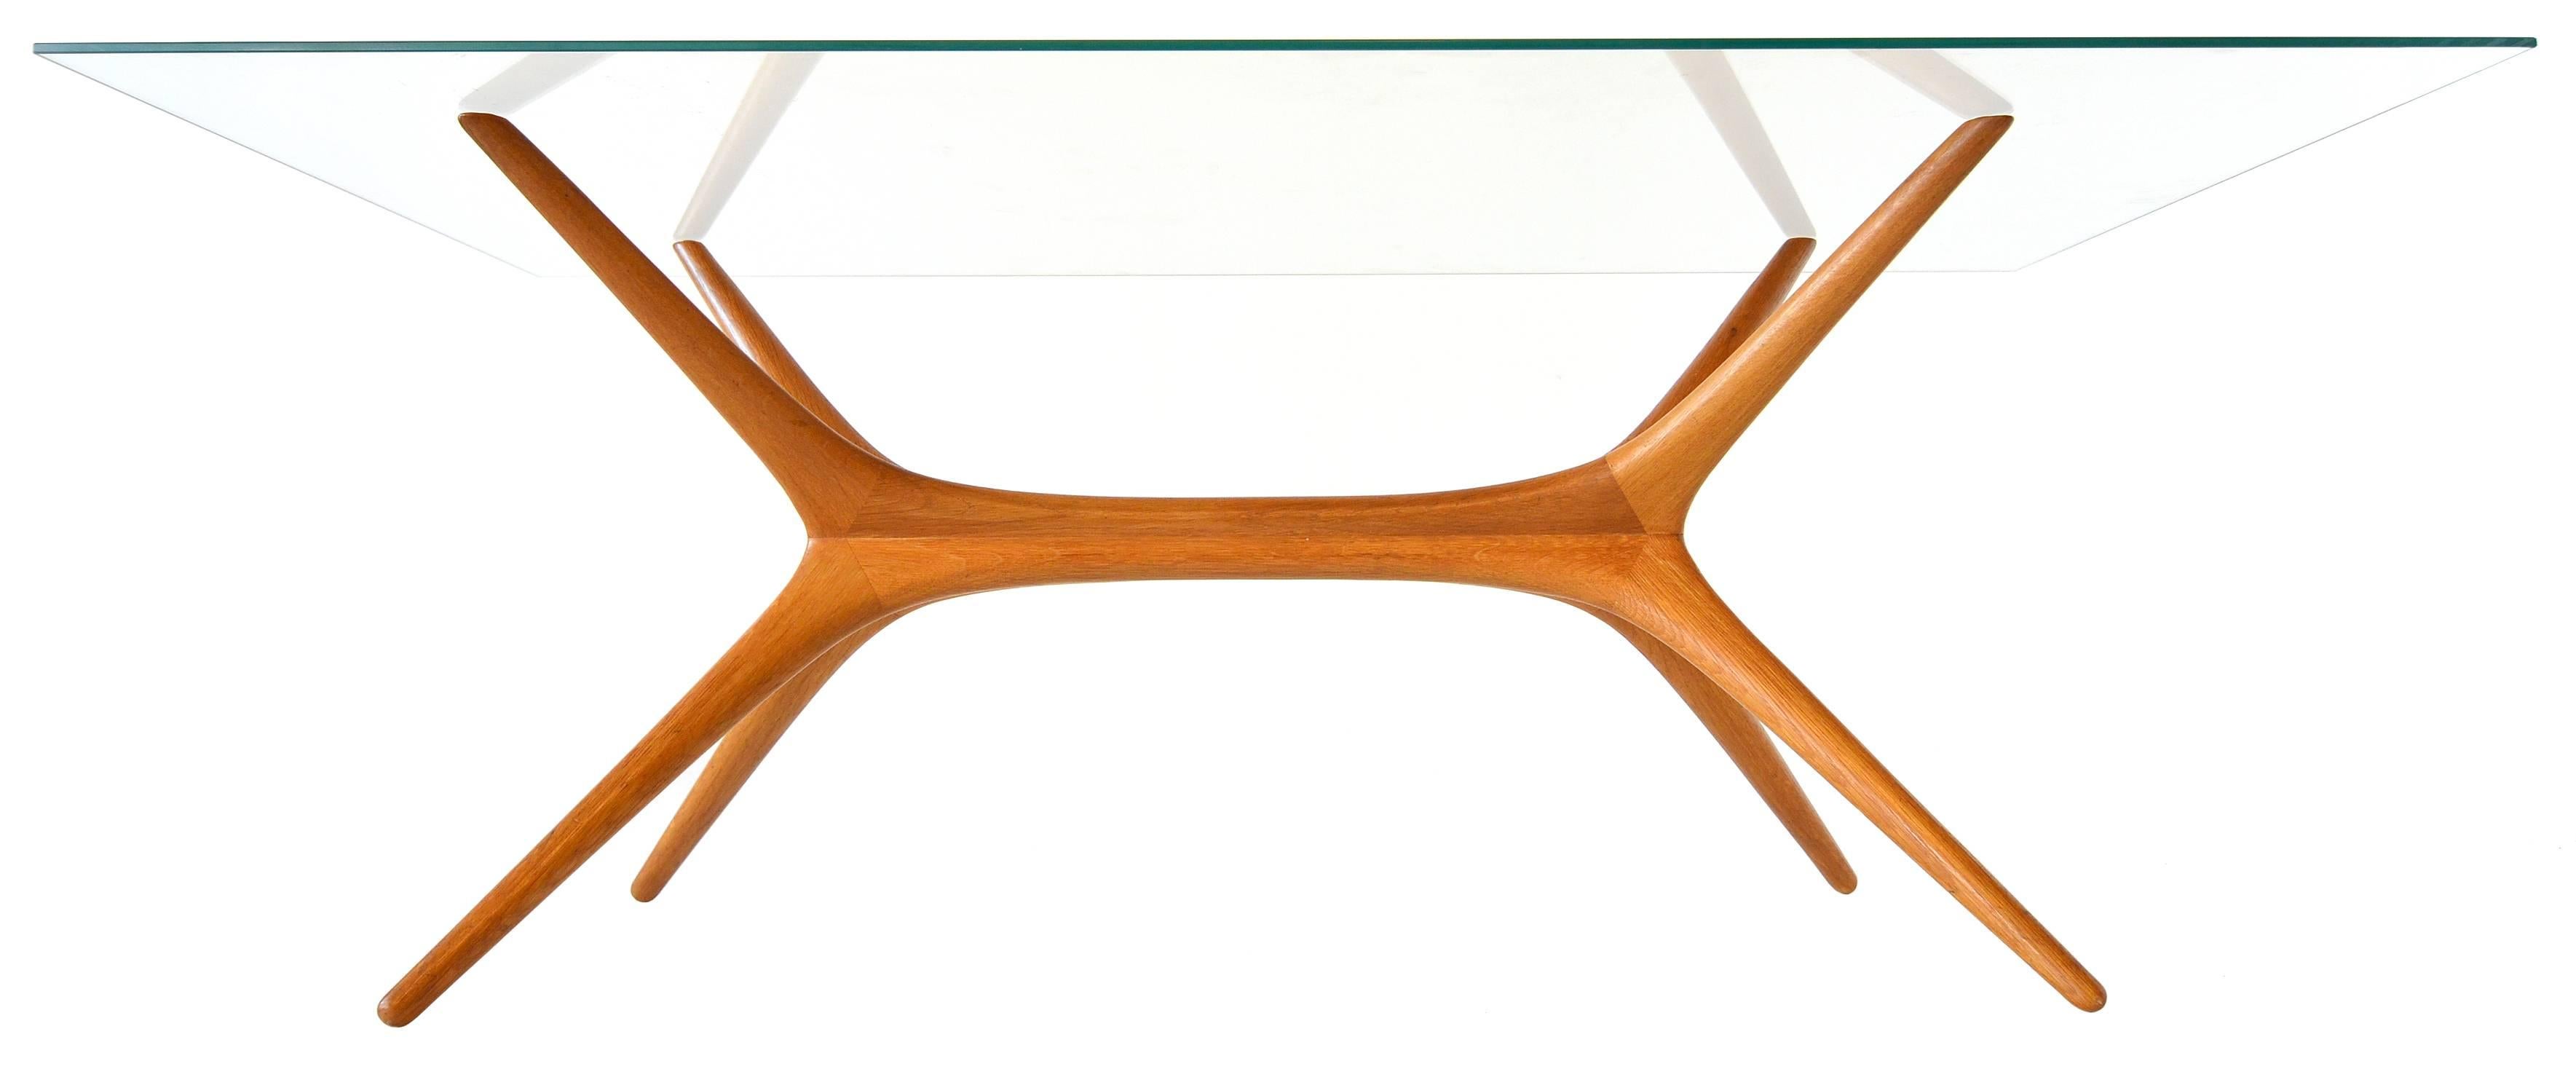 Designed for Asko, Finland in 1958.

These tables are highly sought after and regarded as Tapio Wirkkala's most important production furniture. 

Made from hand-sculpted solid elmwood in four parts. Each quadrant is the exact same form which